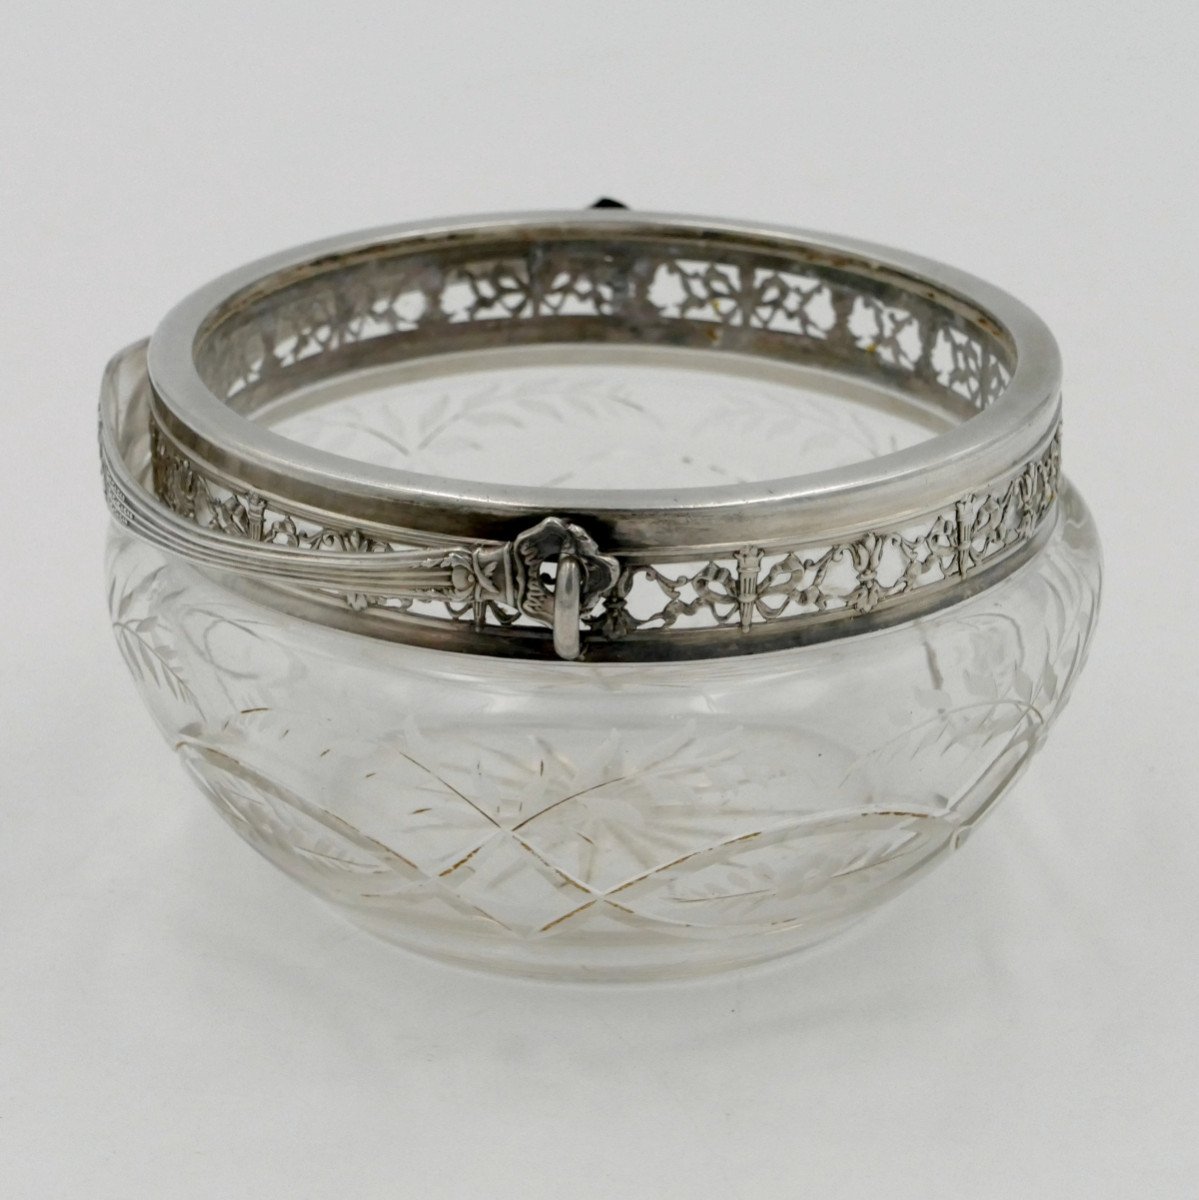 Small Cup Or Bezel In Engraved Crystal, Sterling Silver Mount, Minerva.-photo-2